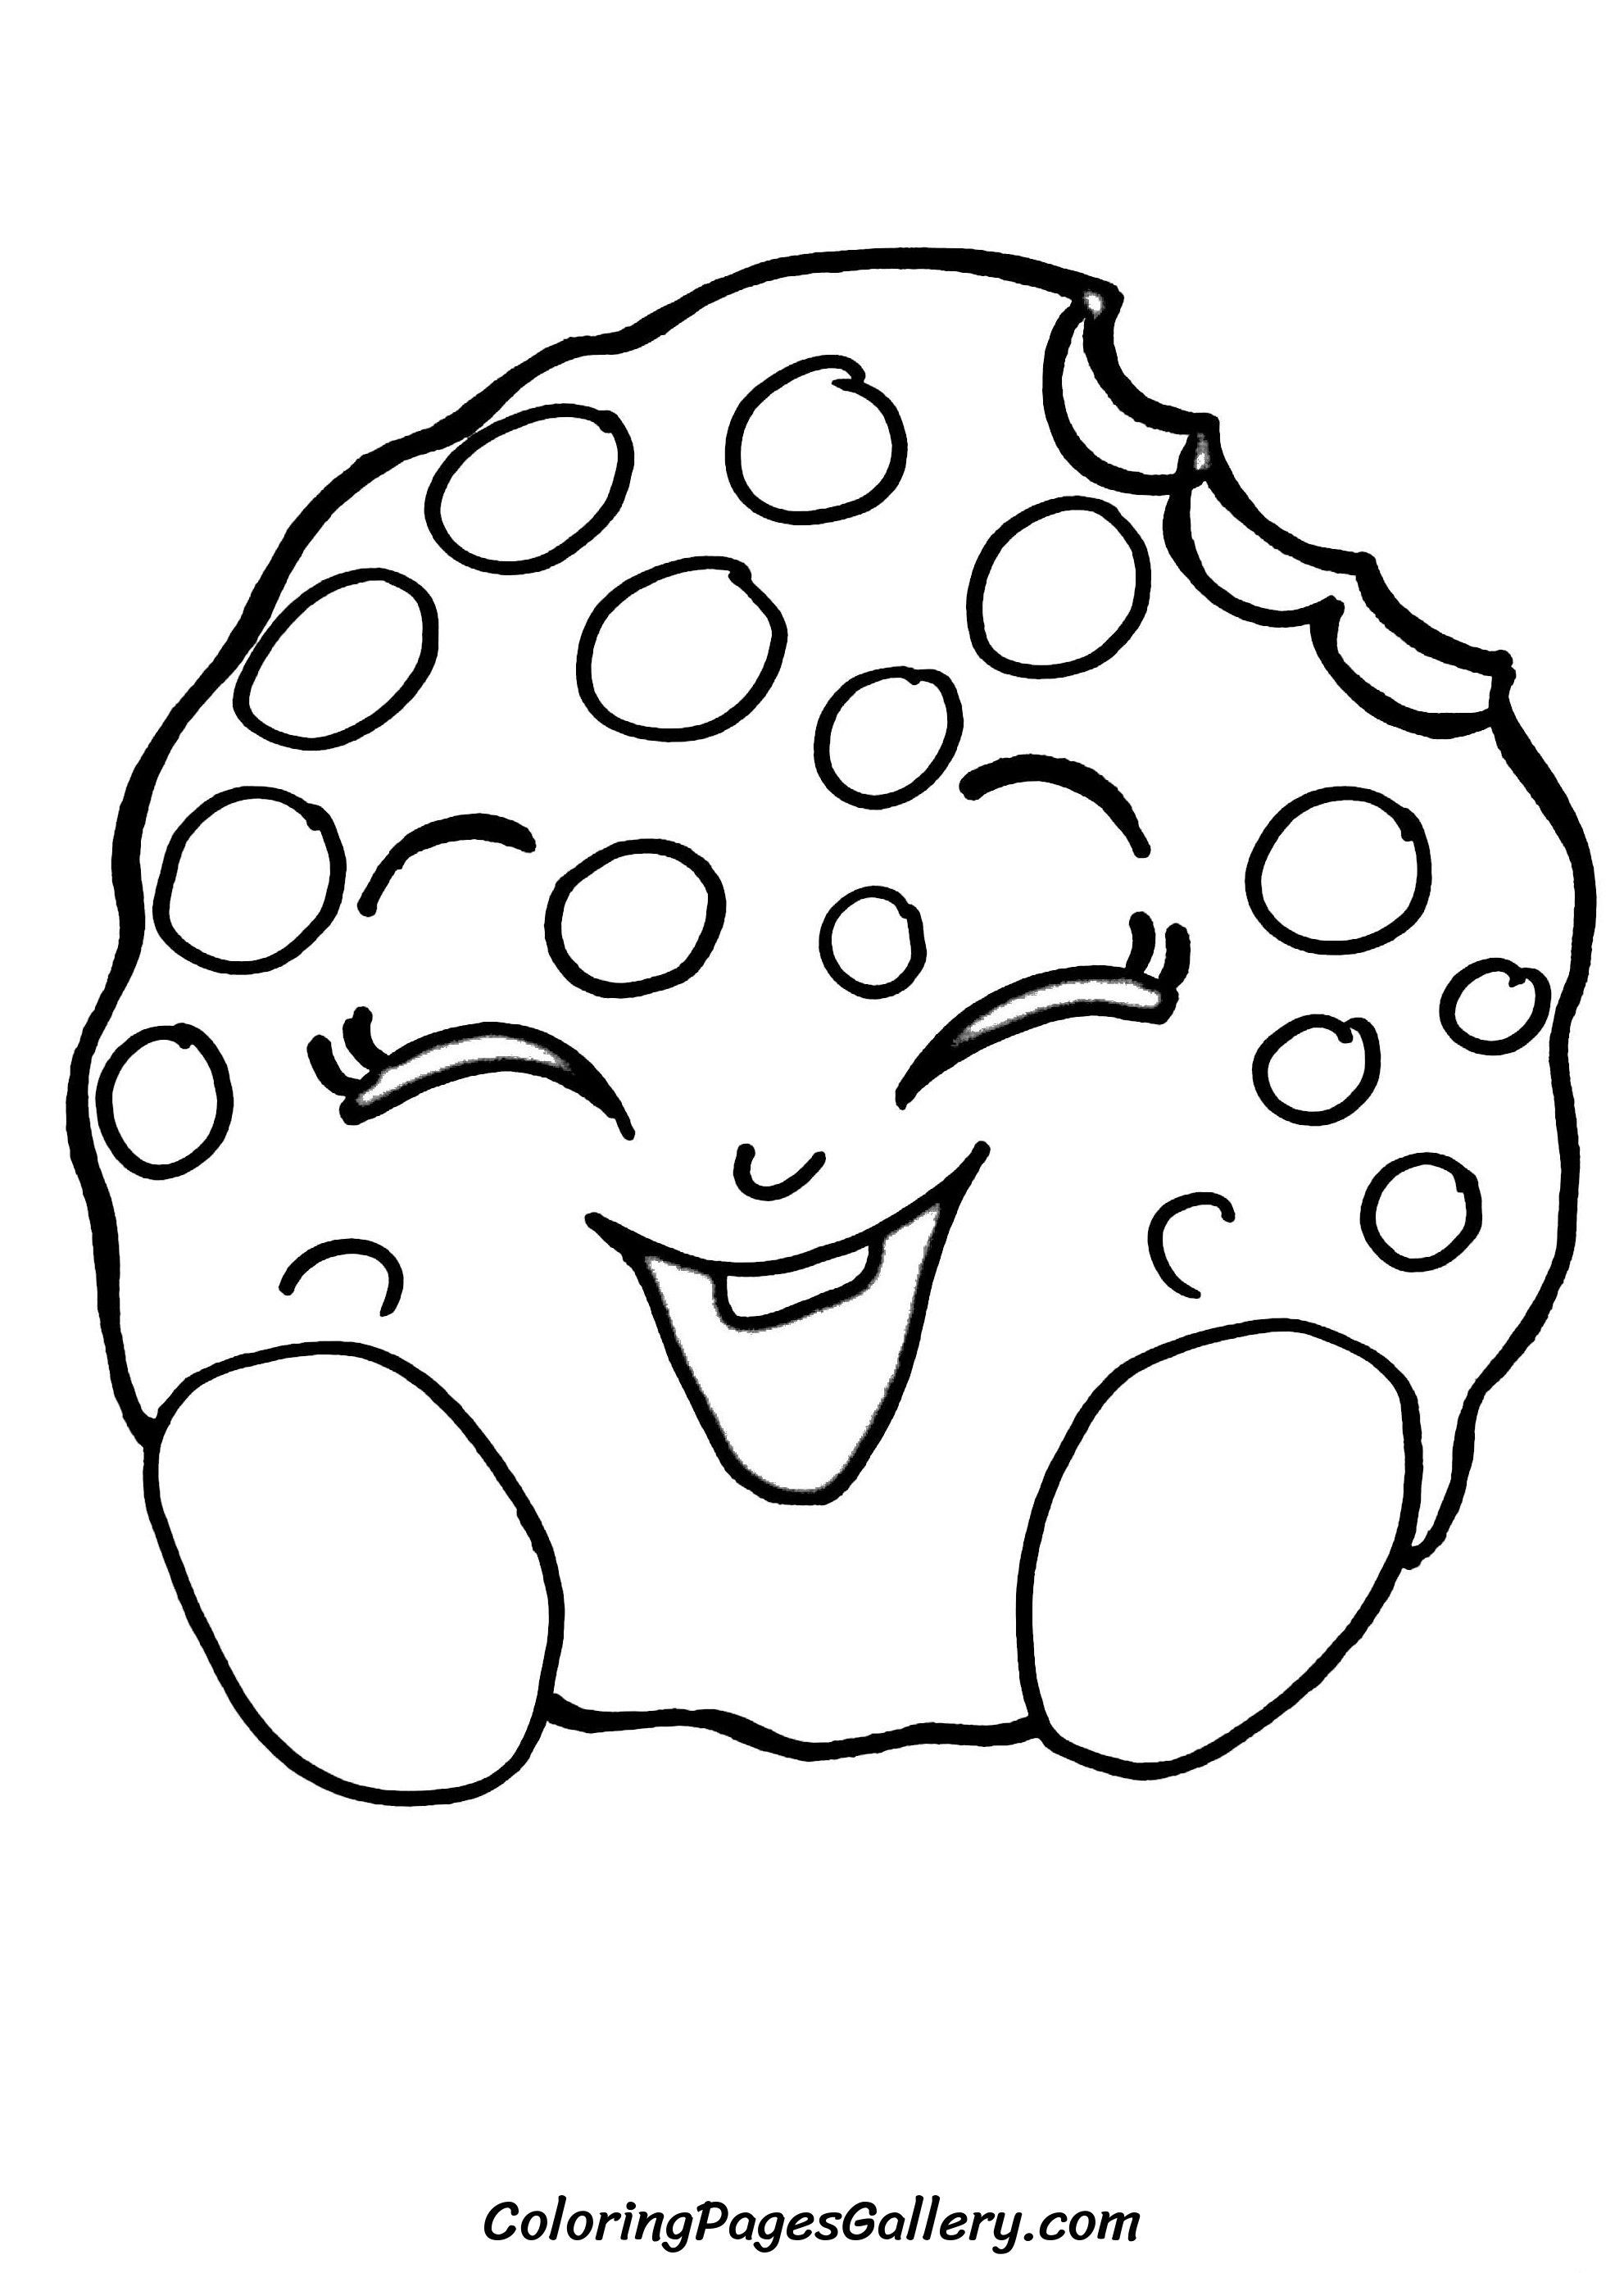 Coloring Pages For Girls Shopkins Cookie
 Shopkins Coloring Pages AZ Coloring Pages